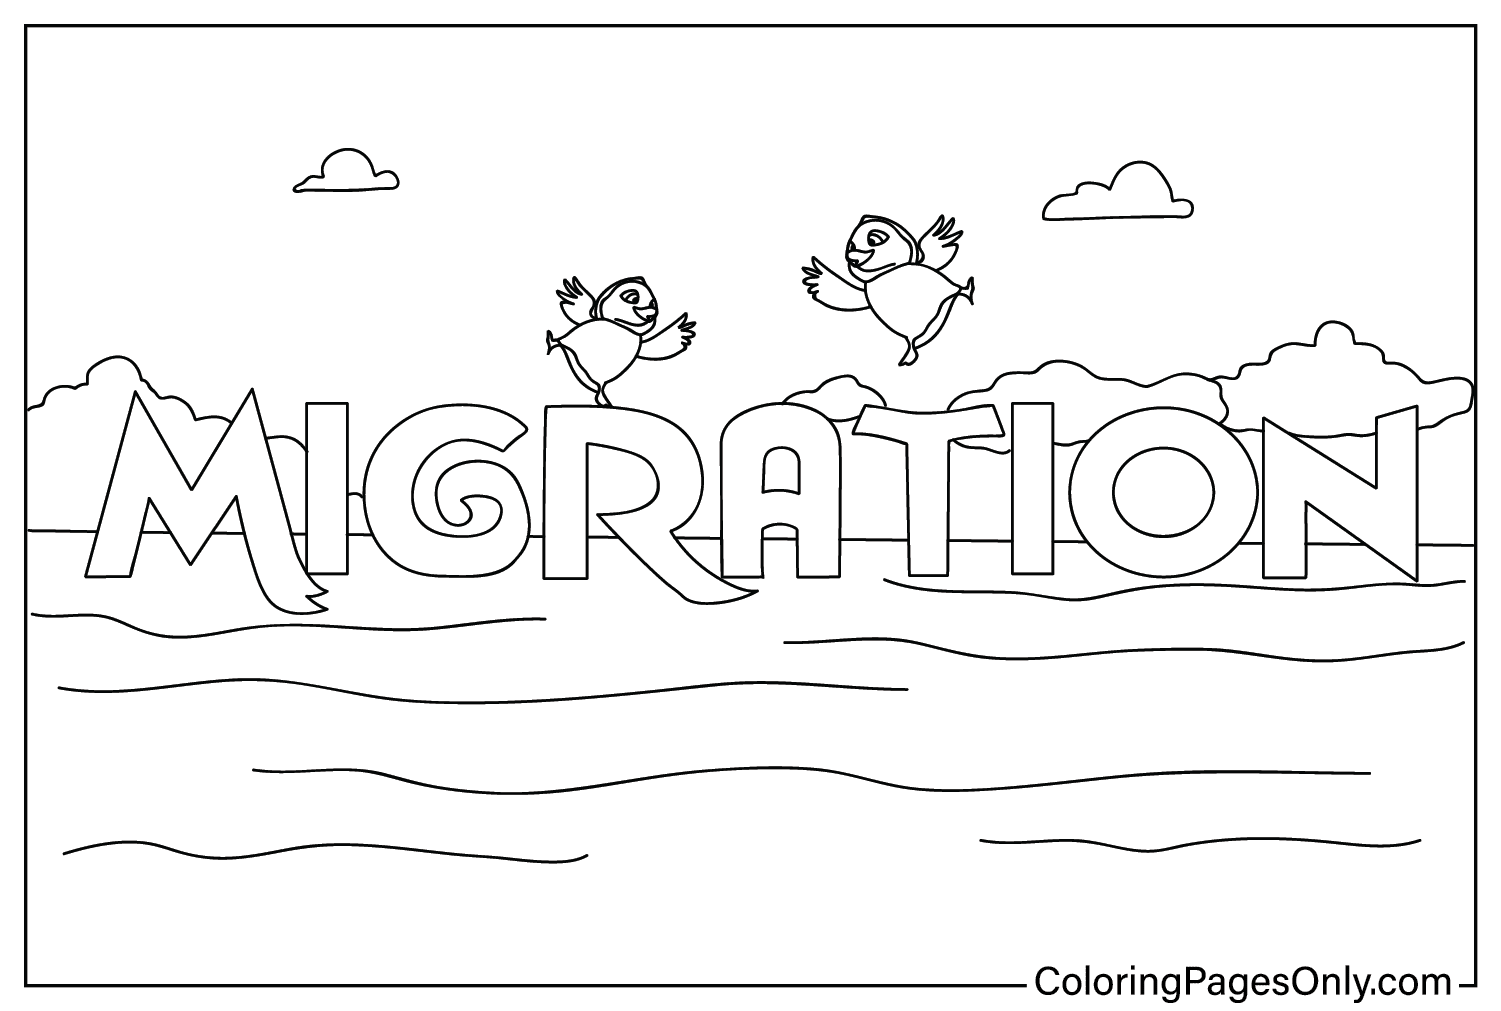 Migration Coloring Page Free from Migration